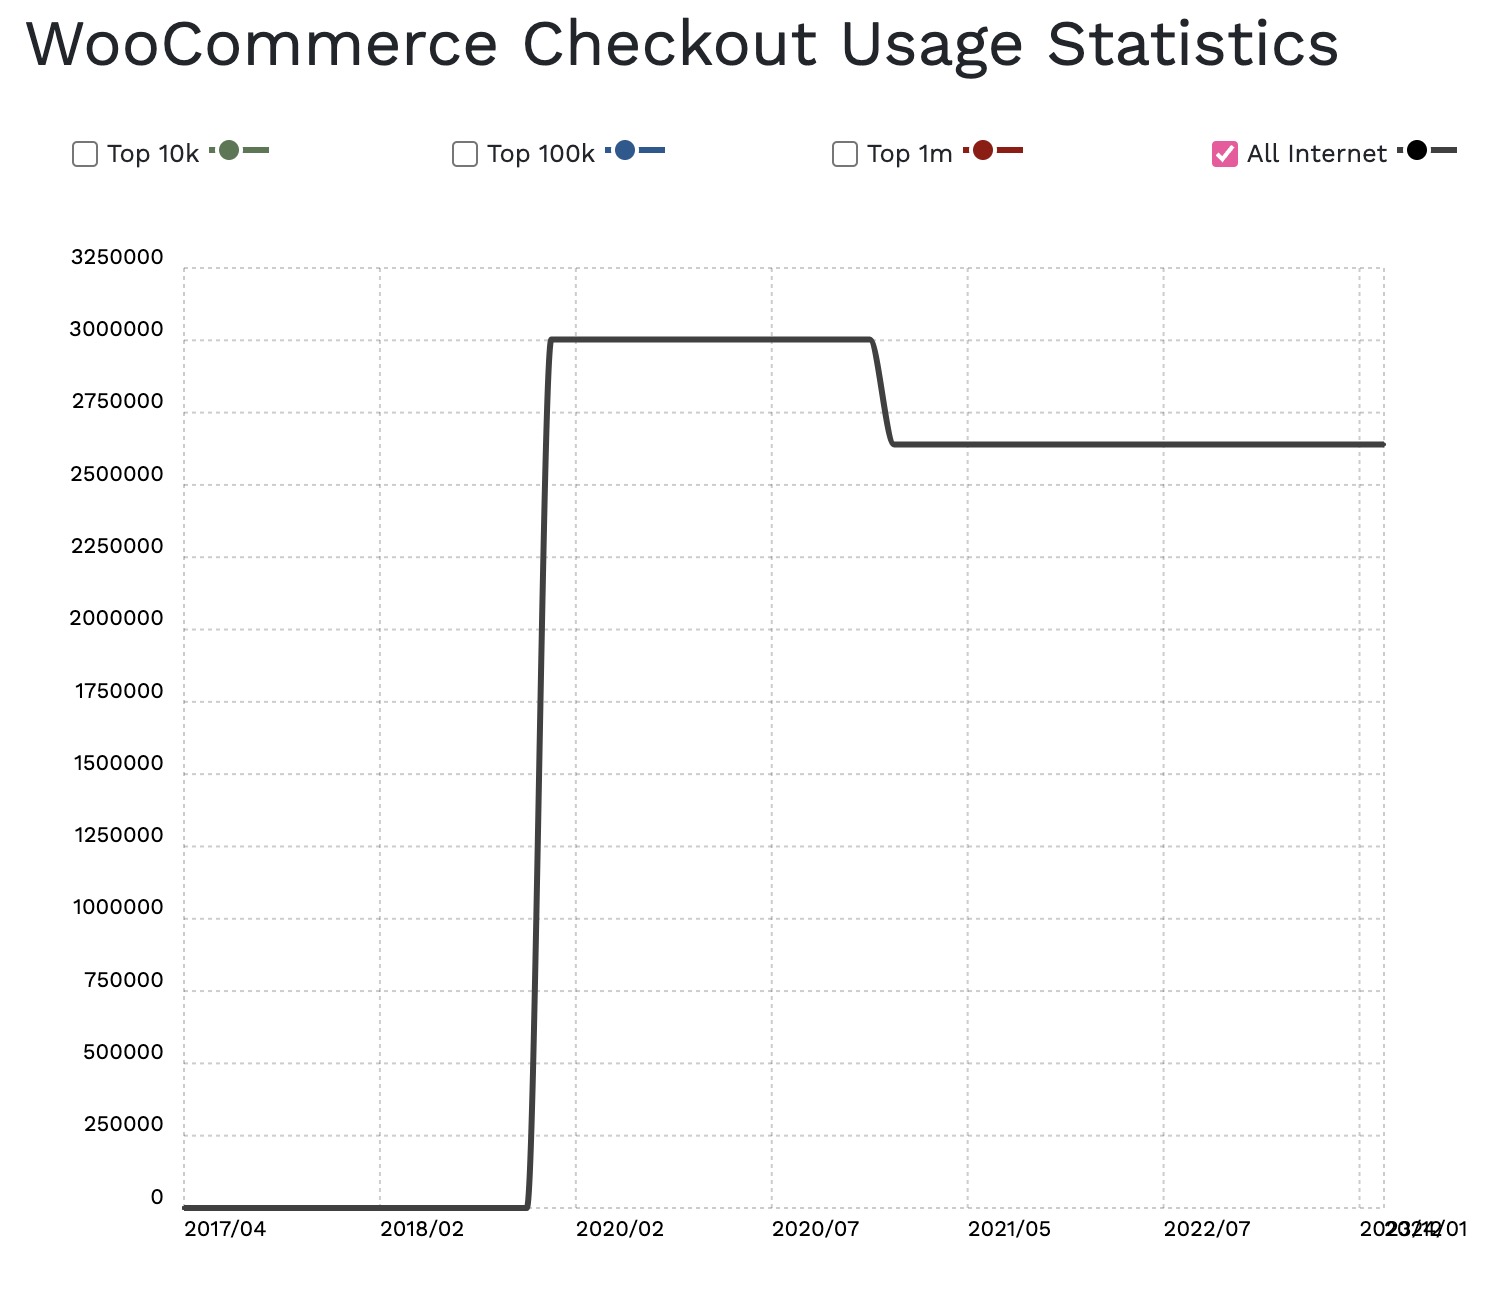 A line graph showing WooCommerce usage has gone up over the years and remains consistently-high since around 2021, when it dipped slightly